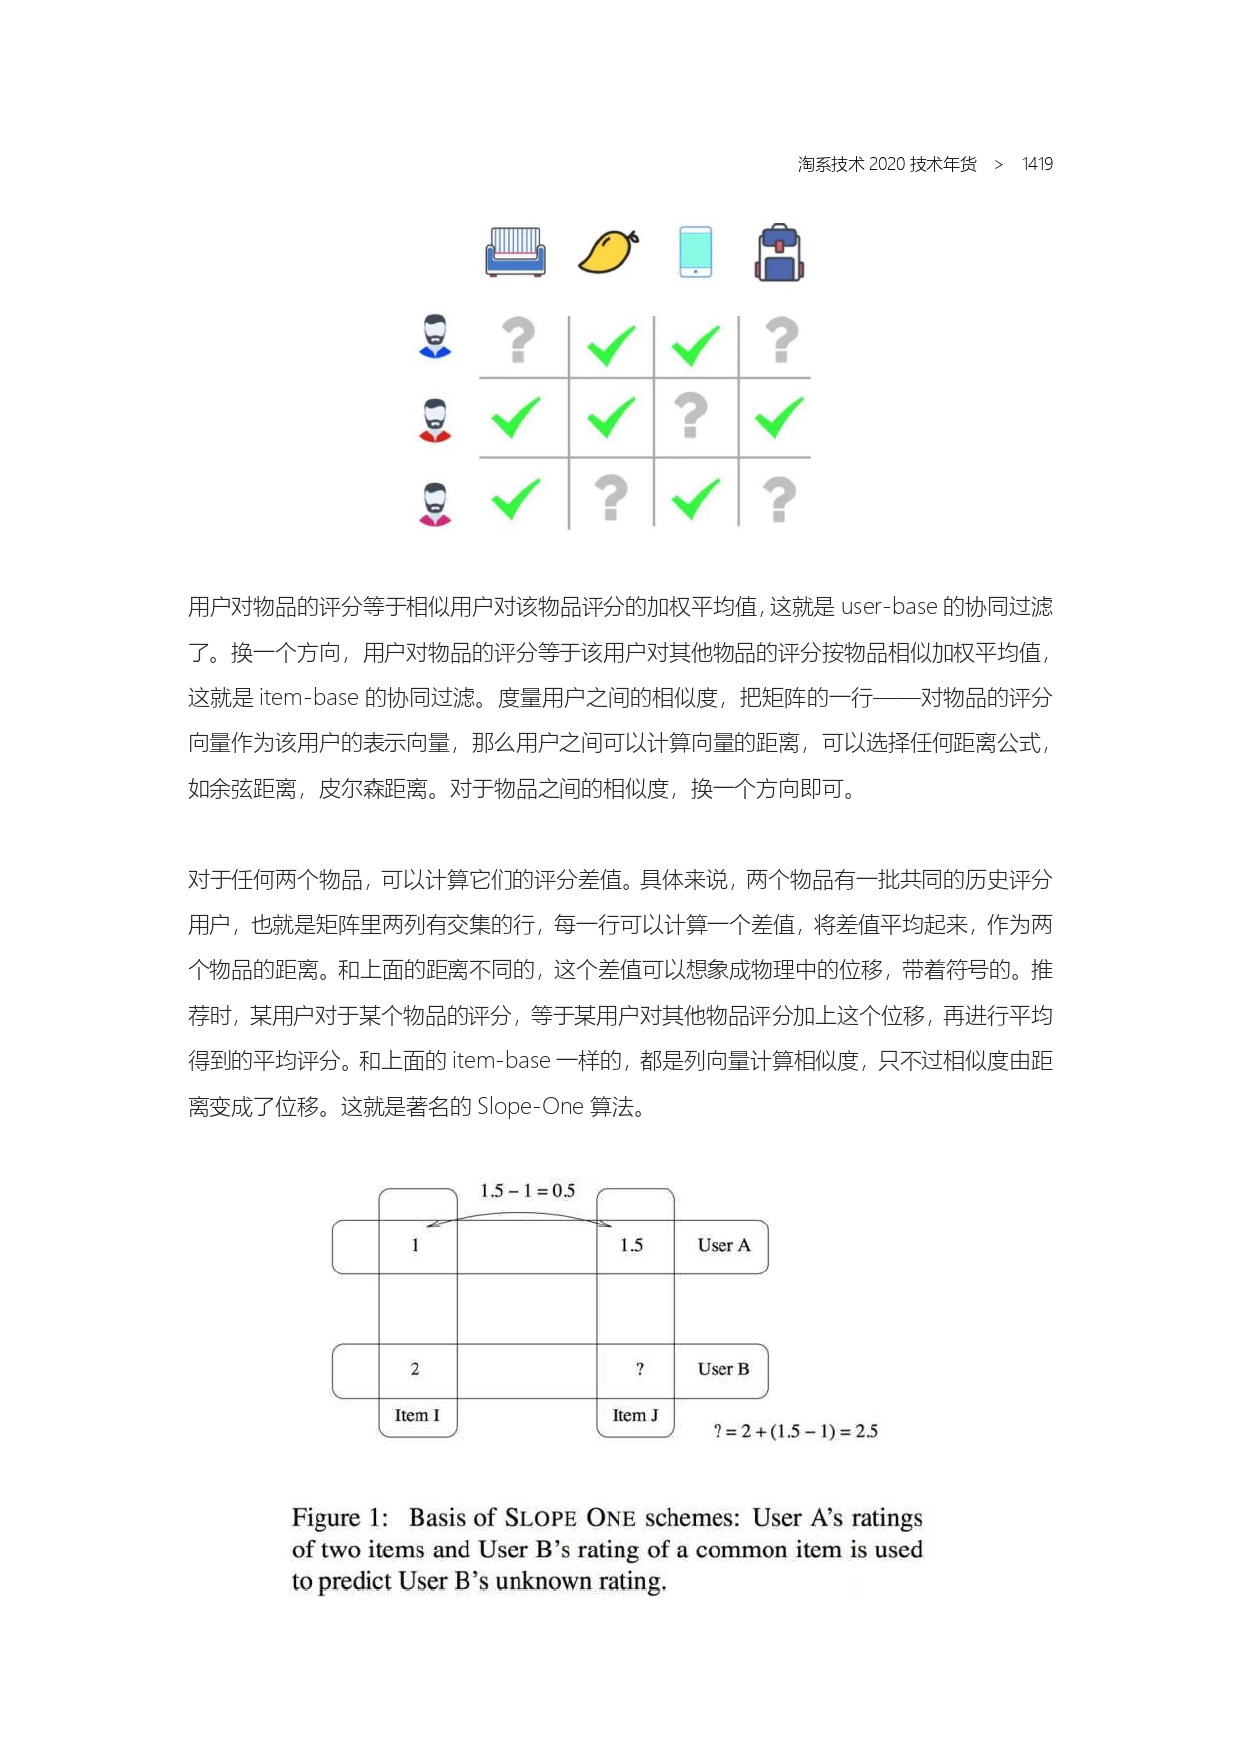 The Complete Works of Tao Technology 2020-1313-1671-1-195_page-0107.jpg